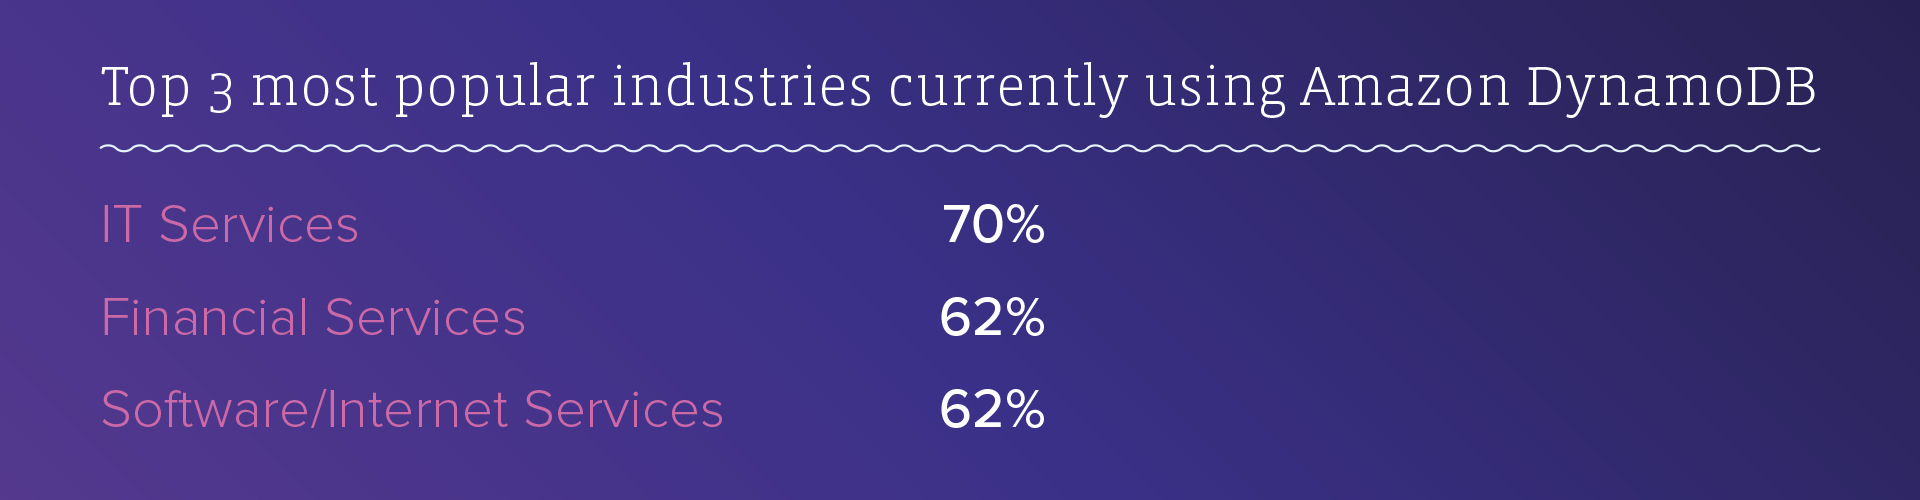 The industries using Amazon DynamoDB most are IT services (70%), Finance (62%) and Software Services (62%)